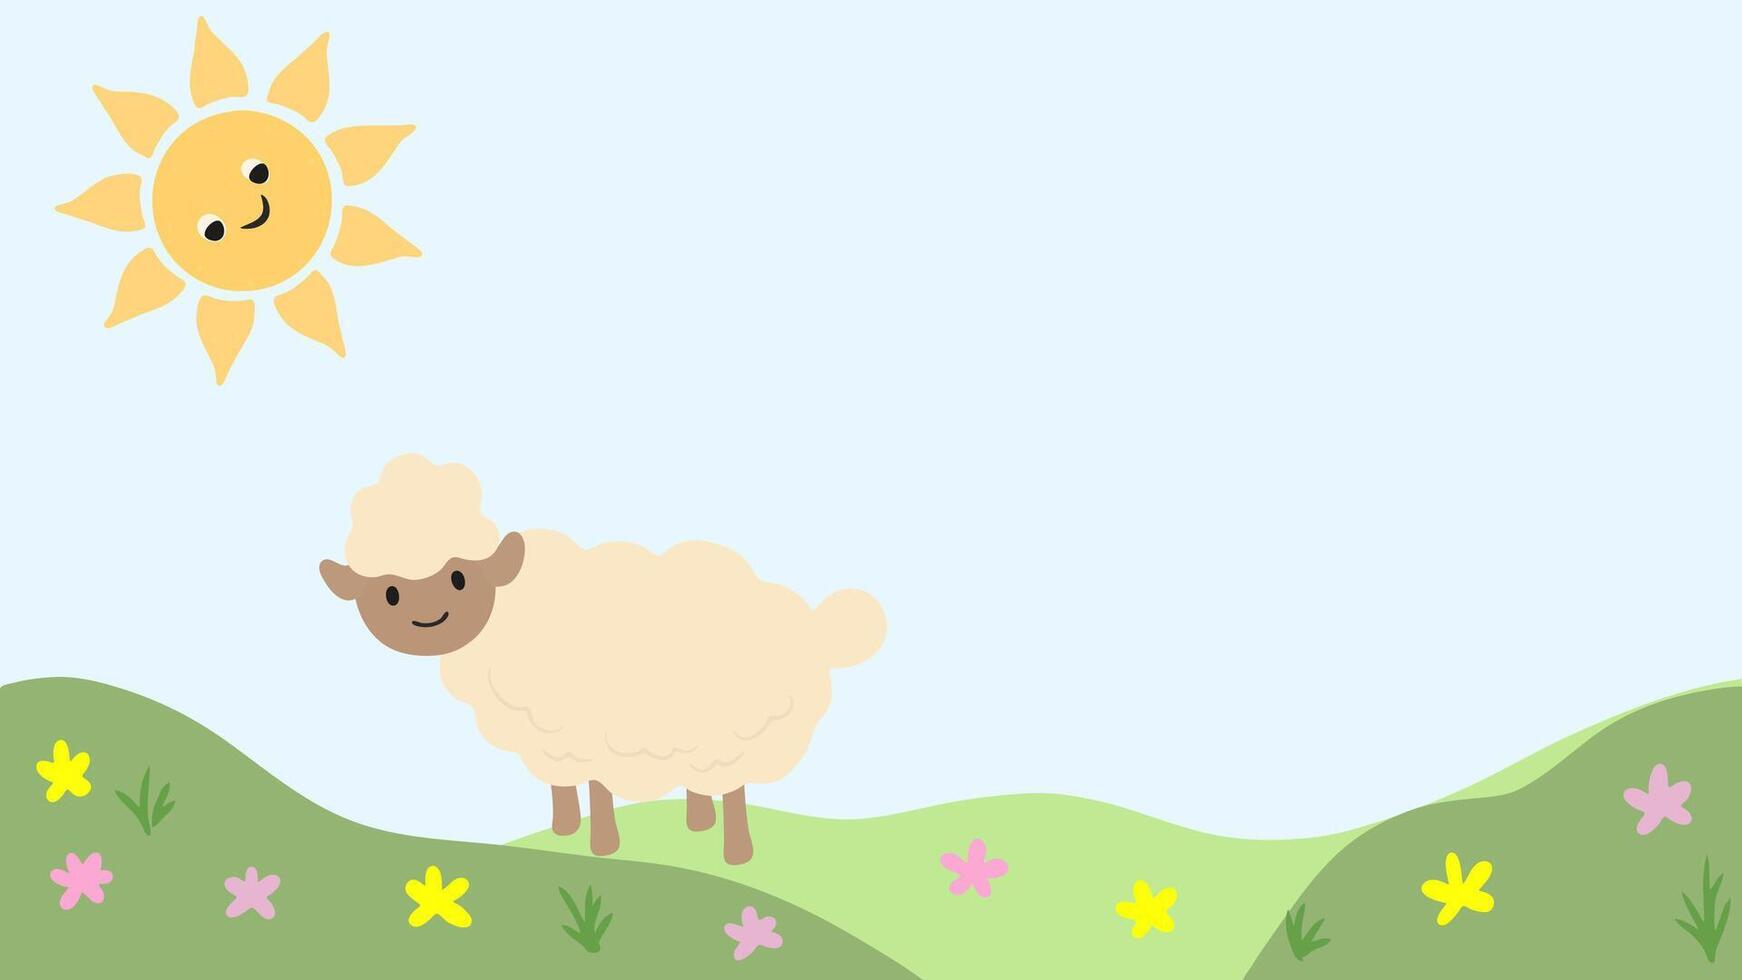 illustration of a sheep in green field with flowers and the sun, graphic vector